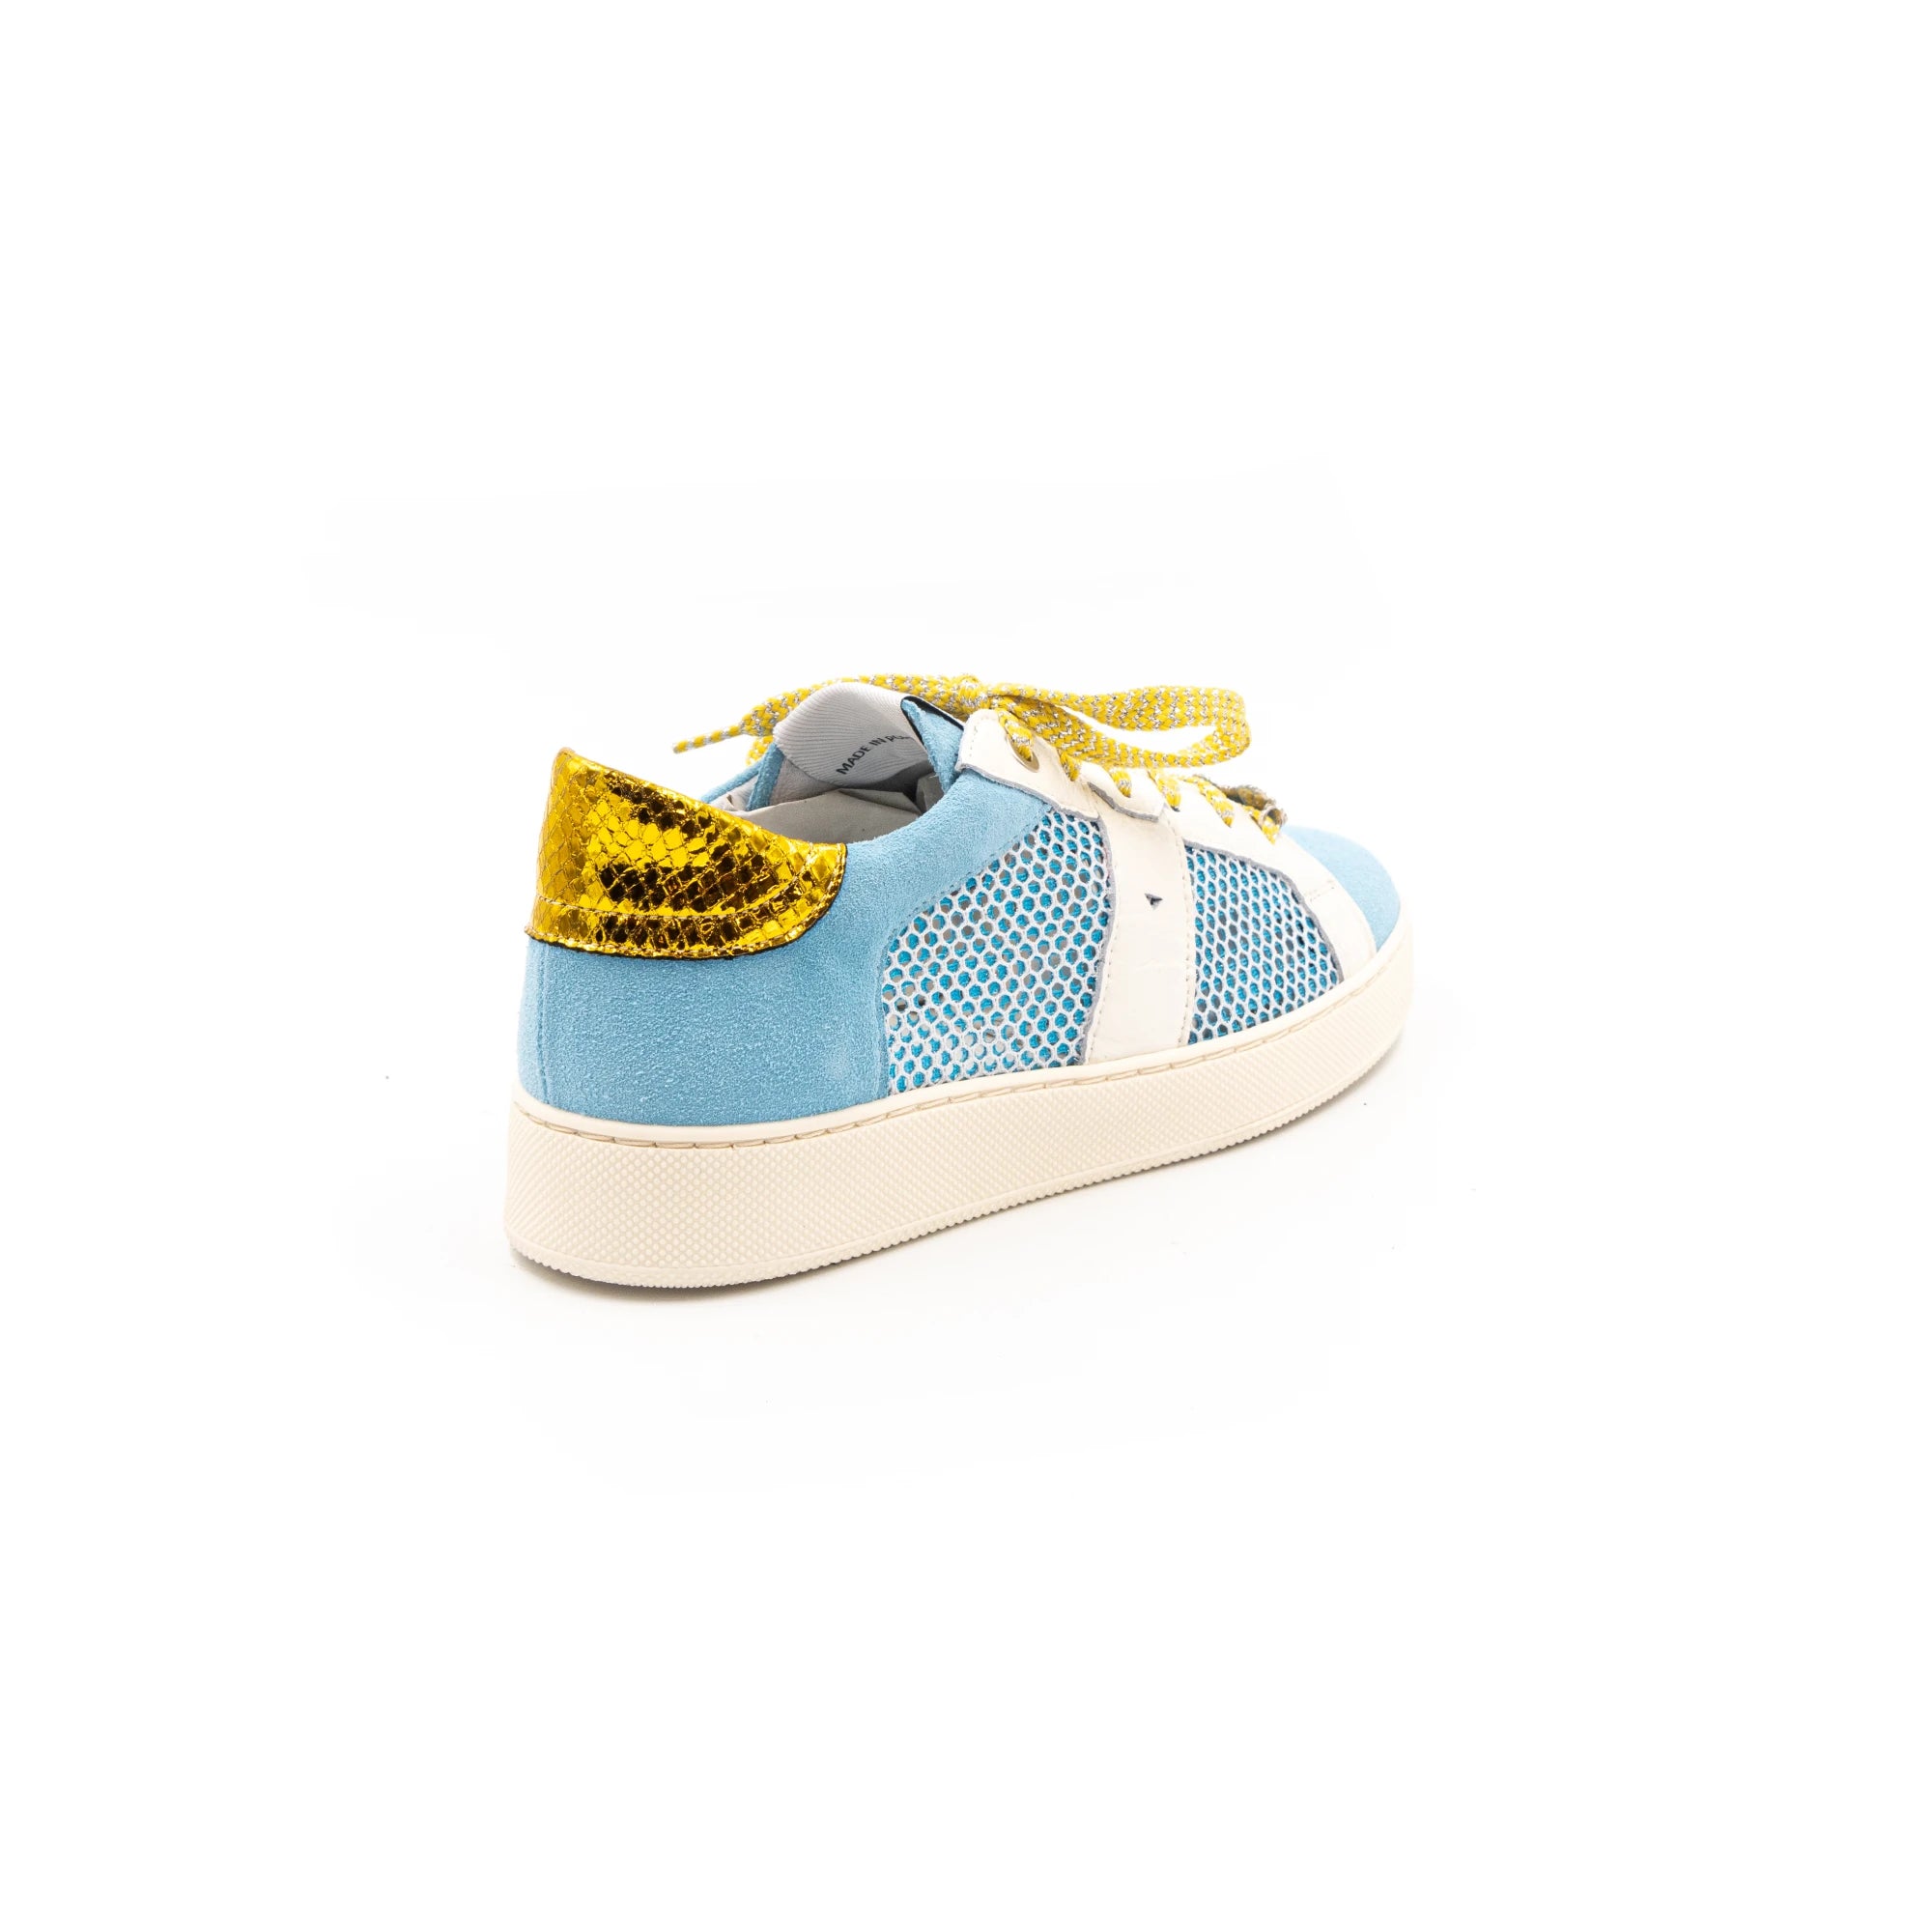 Blue sneakers with gold accents and white rubber.